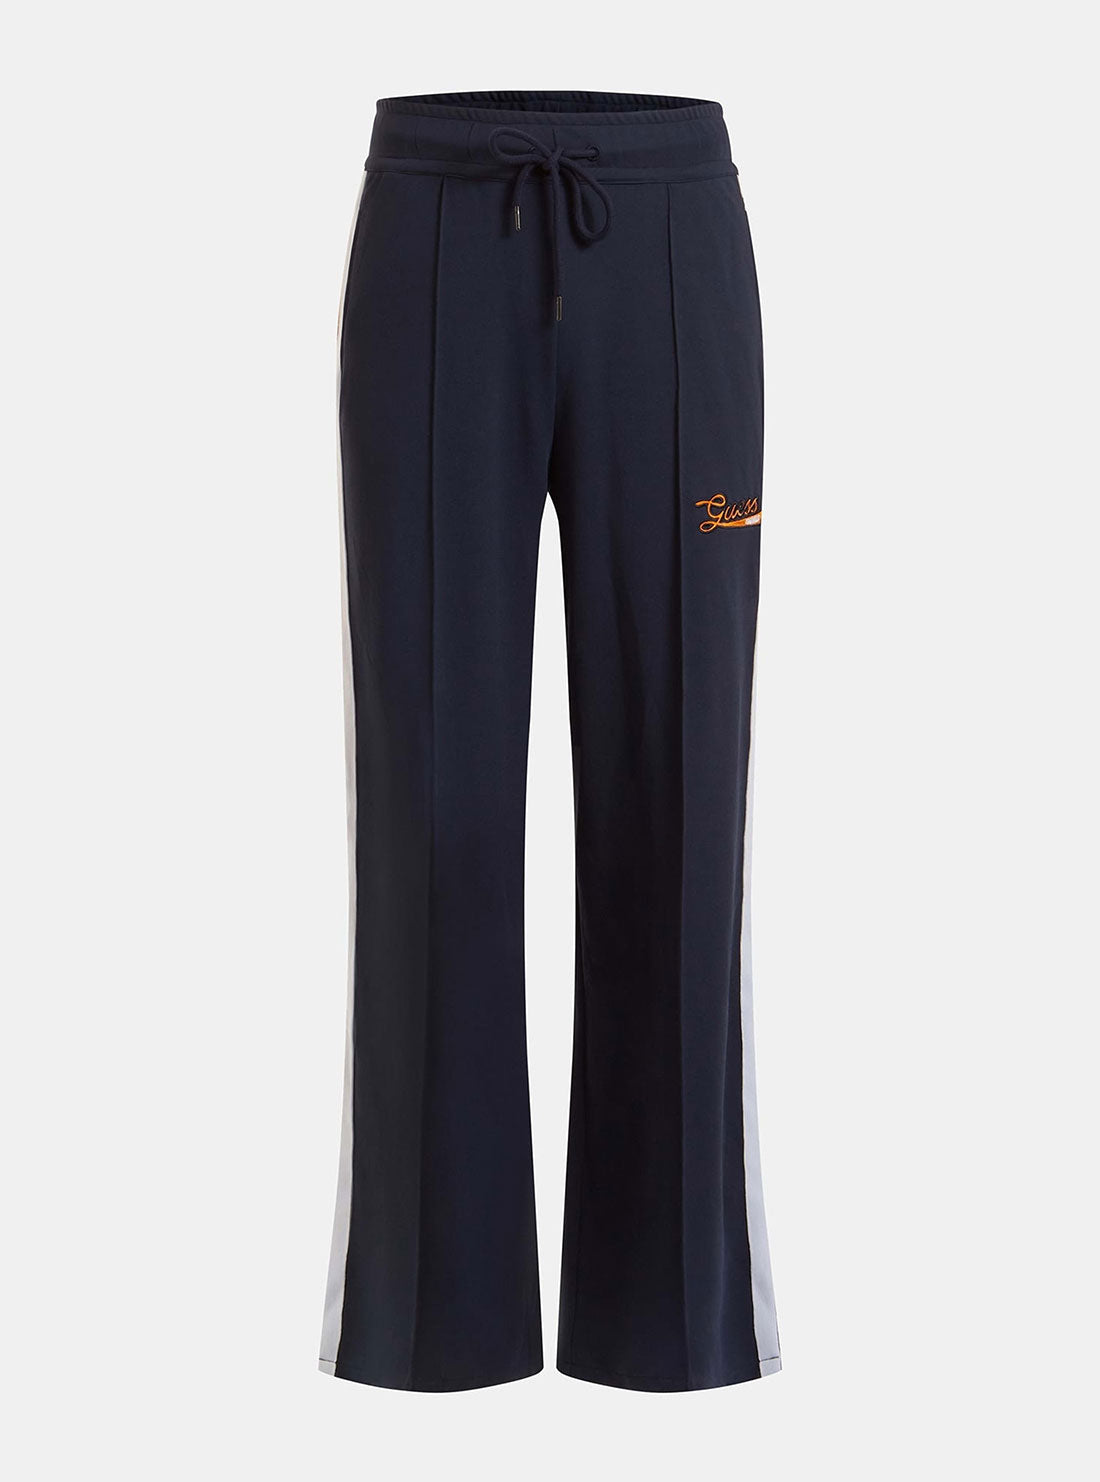 GUESS Women's Guess Originals Navy Virsa Trackpants W2YB05K7PU0 Ghost Front View